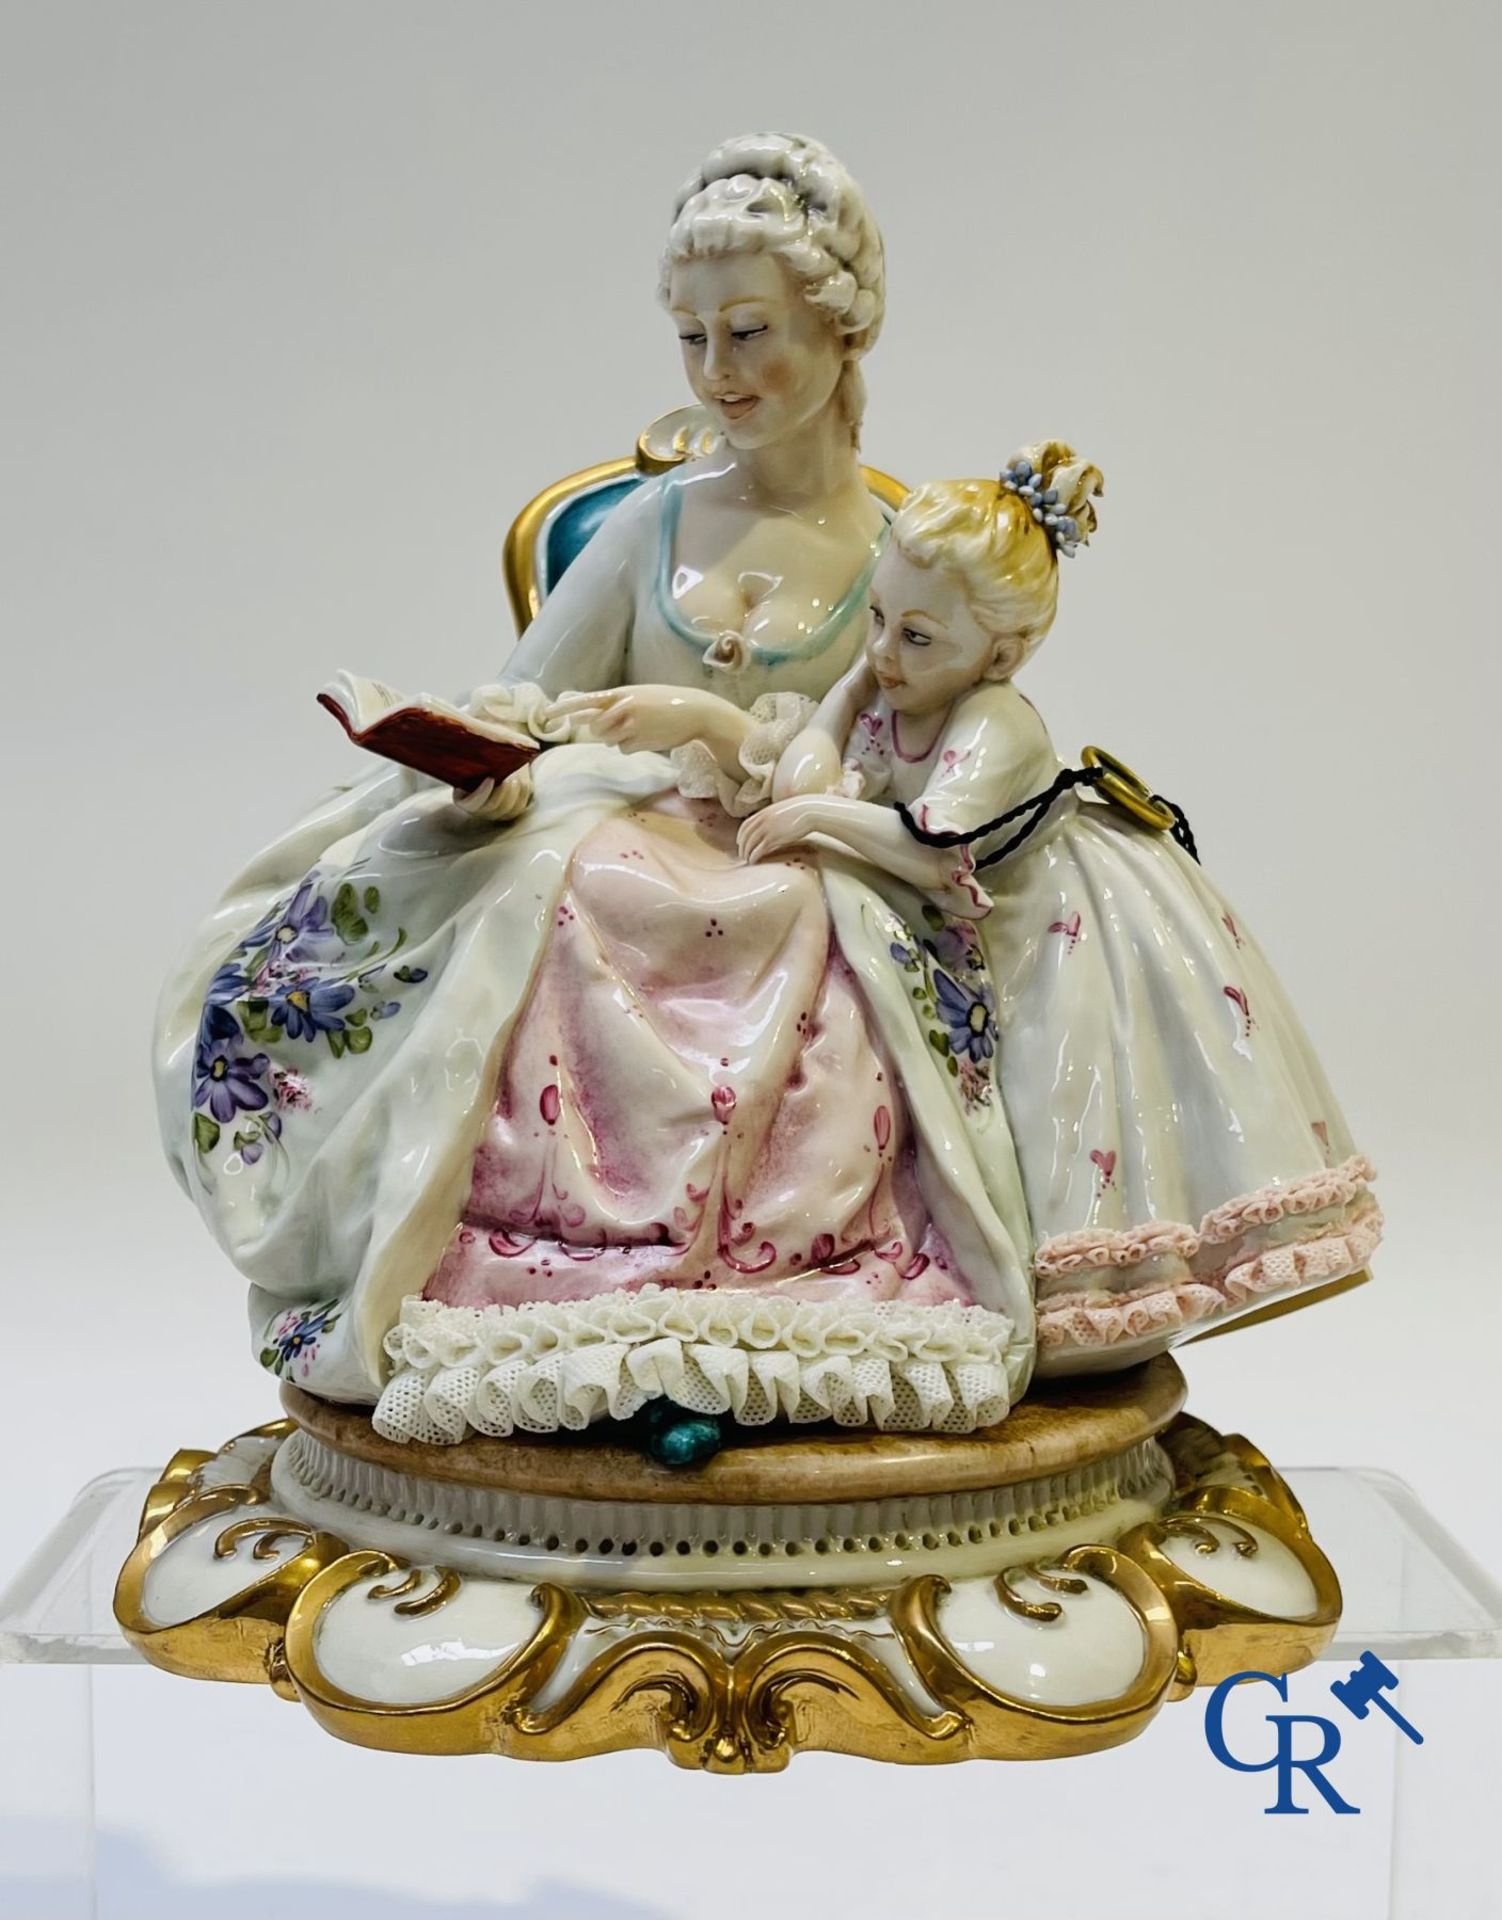 Porcelain: Capodimonte: 3 groups in Italian porcelain with lace. - Image 3 of 12